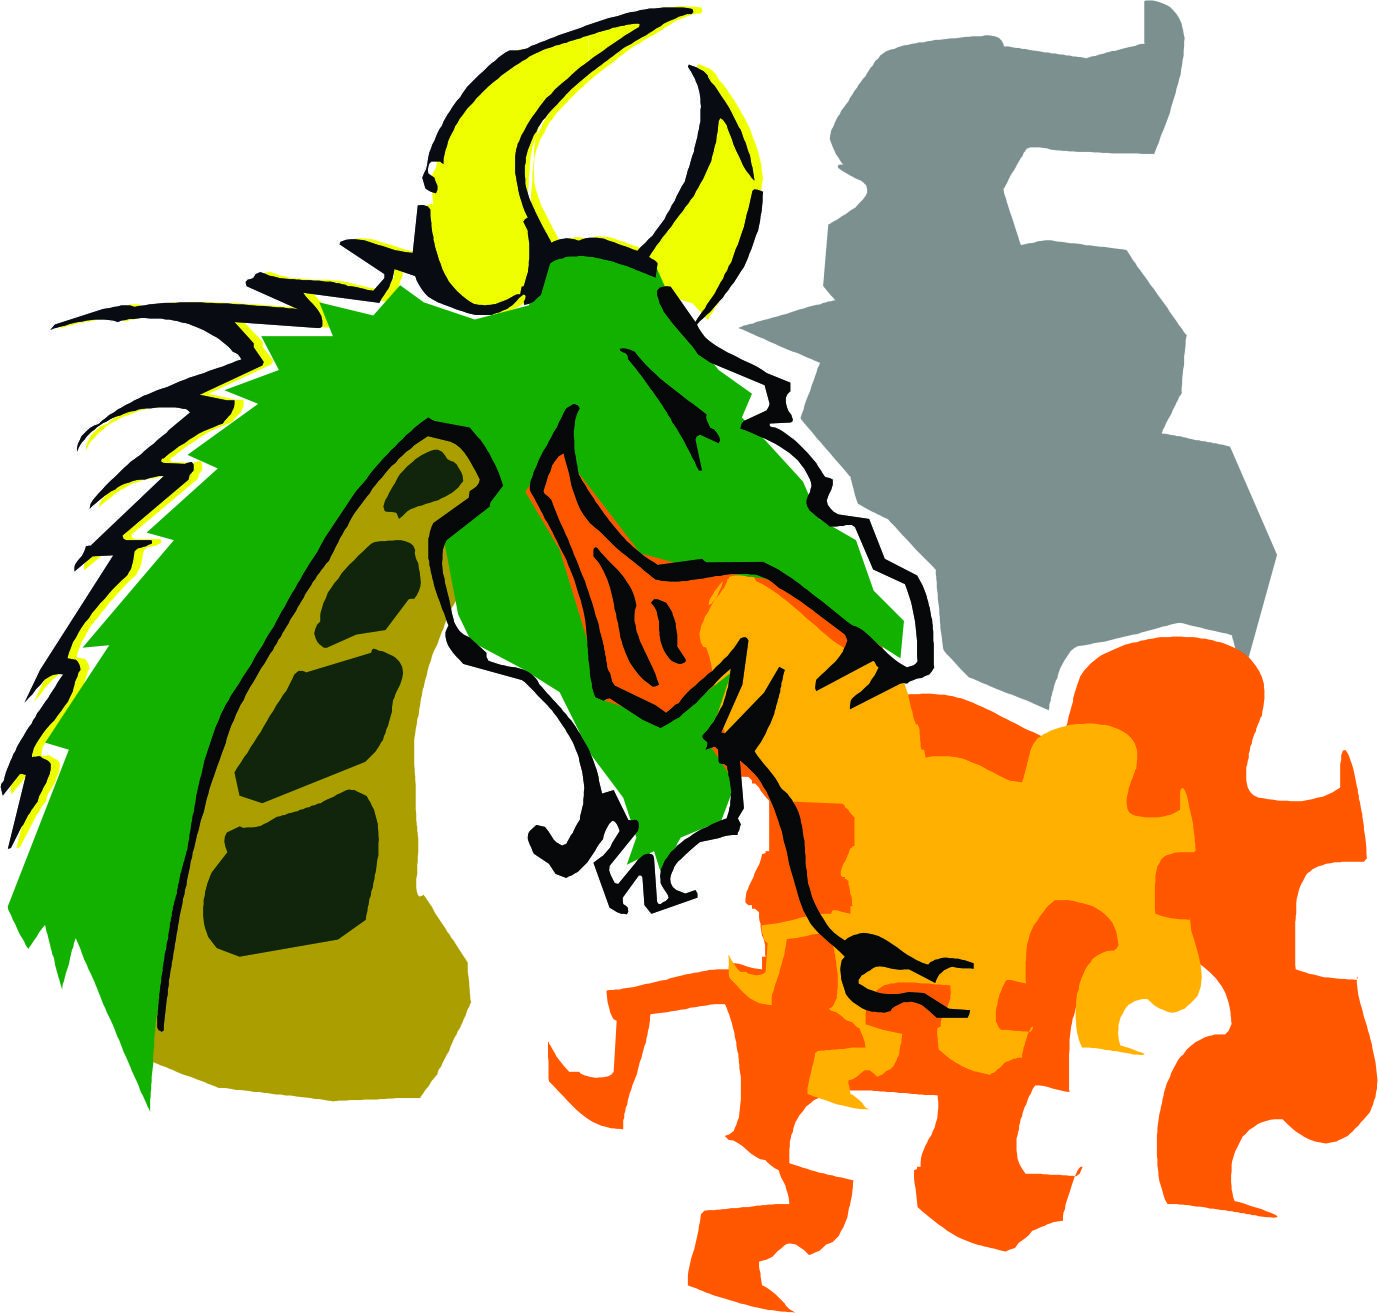 Picture Of Cartoon Dragon - ClipArt Best